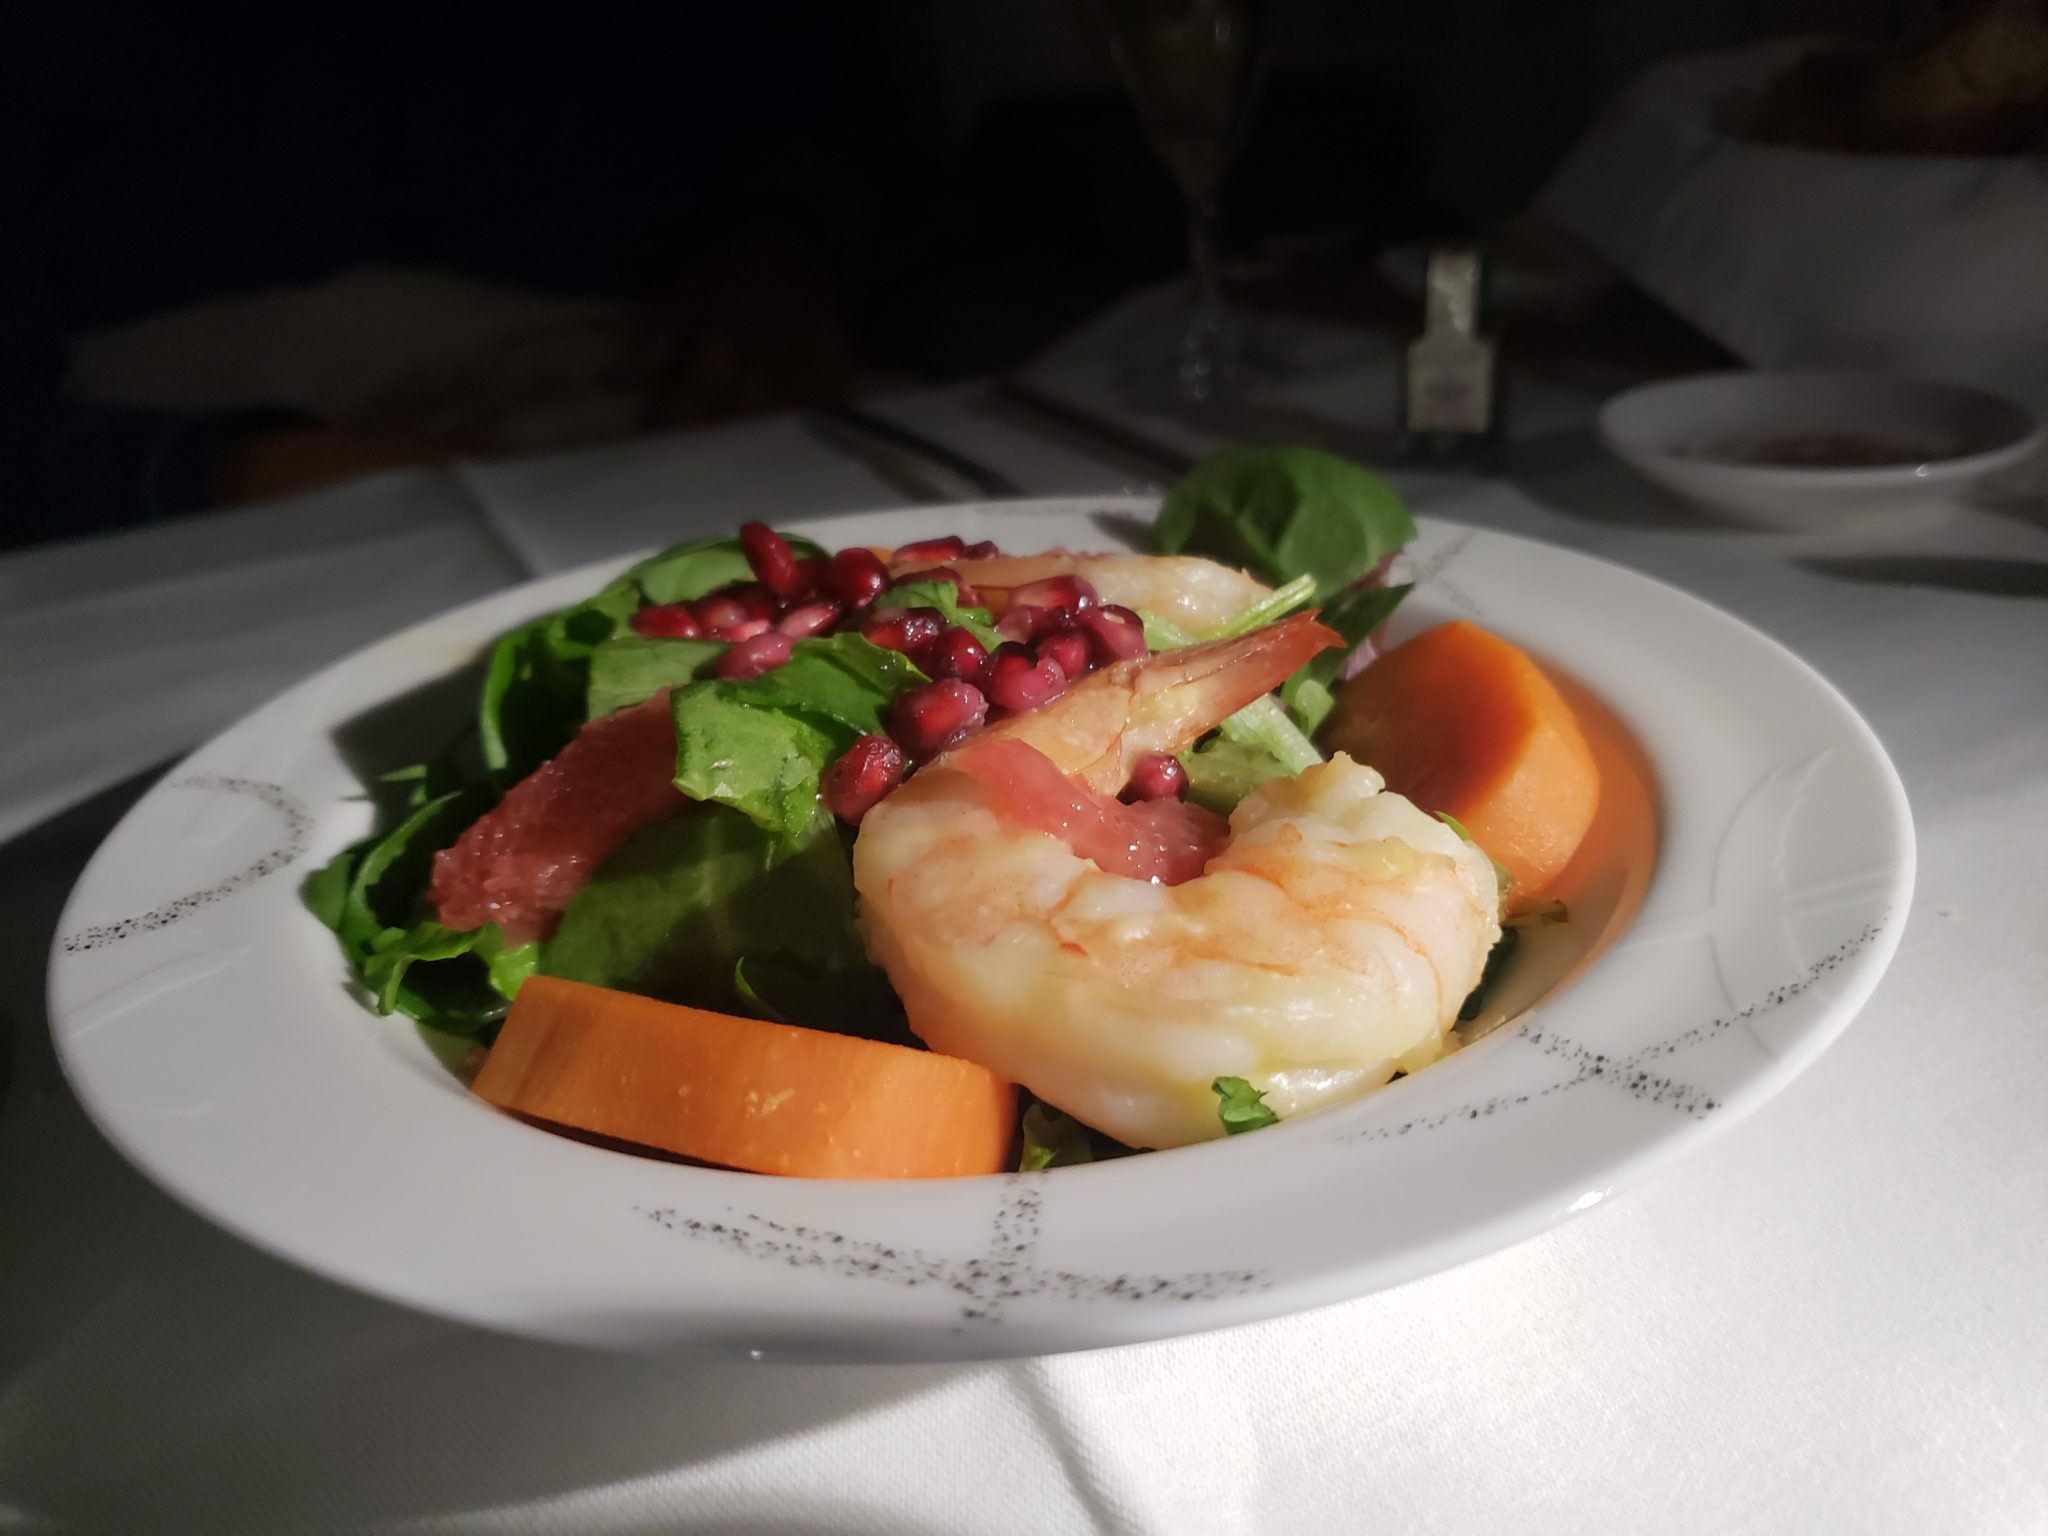 a plate of salad with shrimp and vegetables